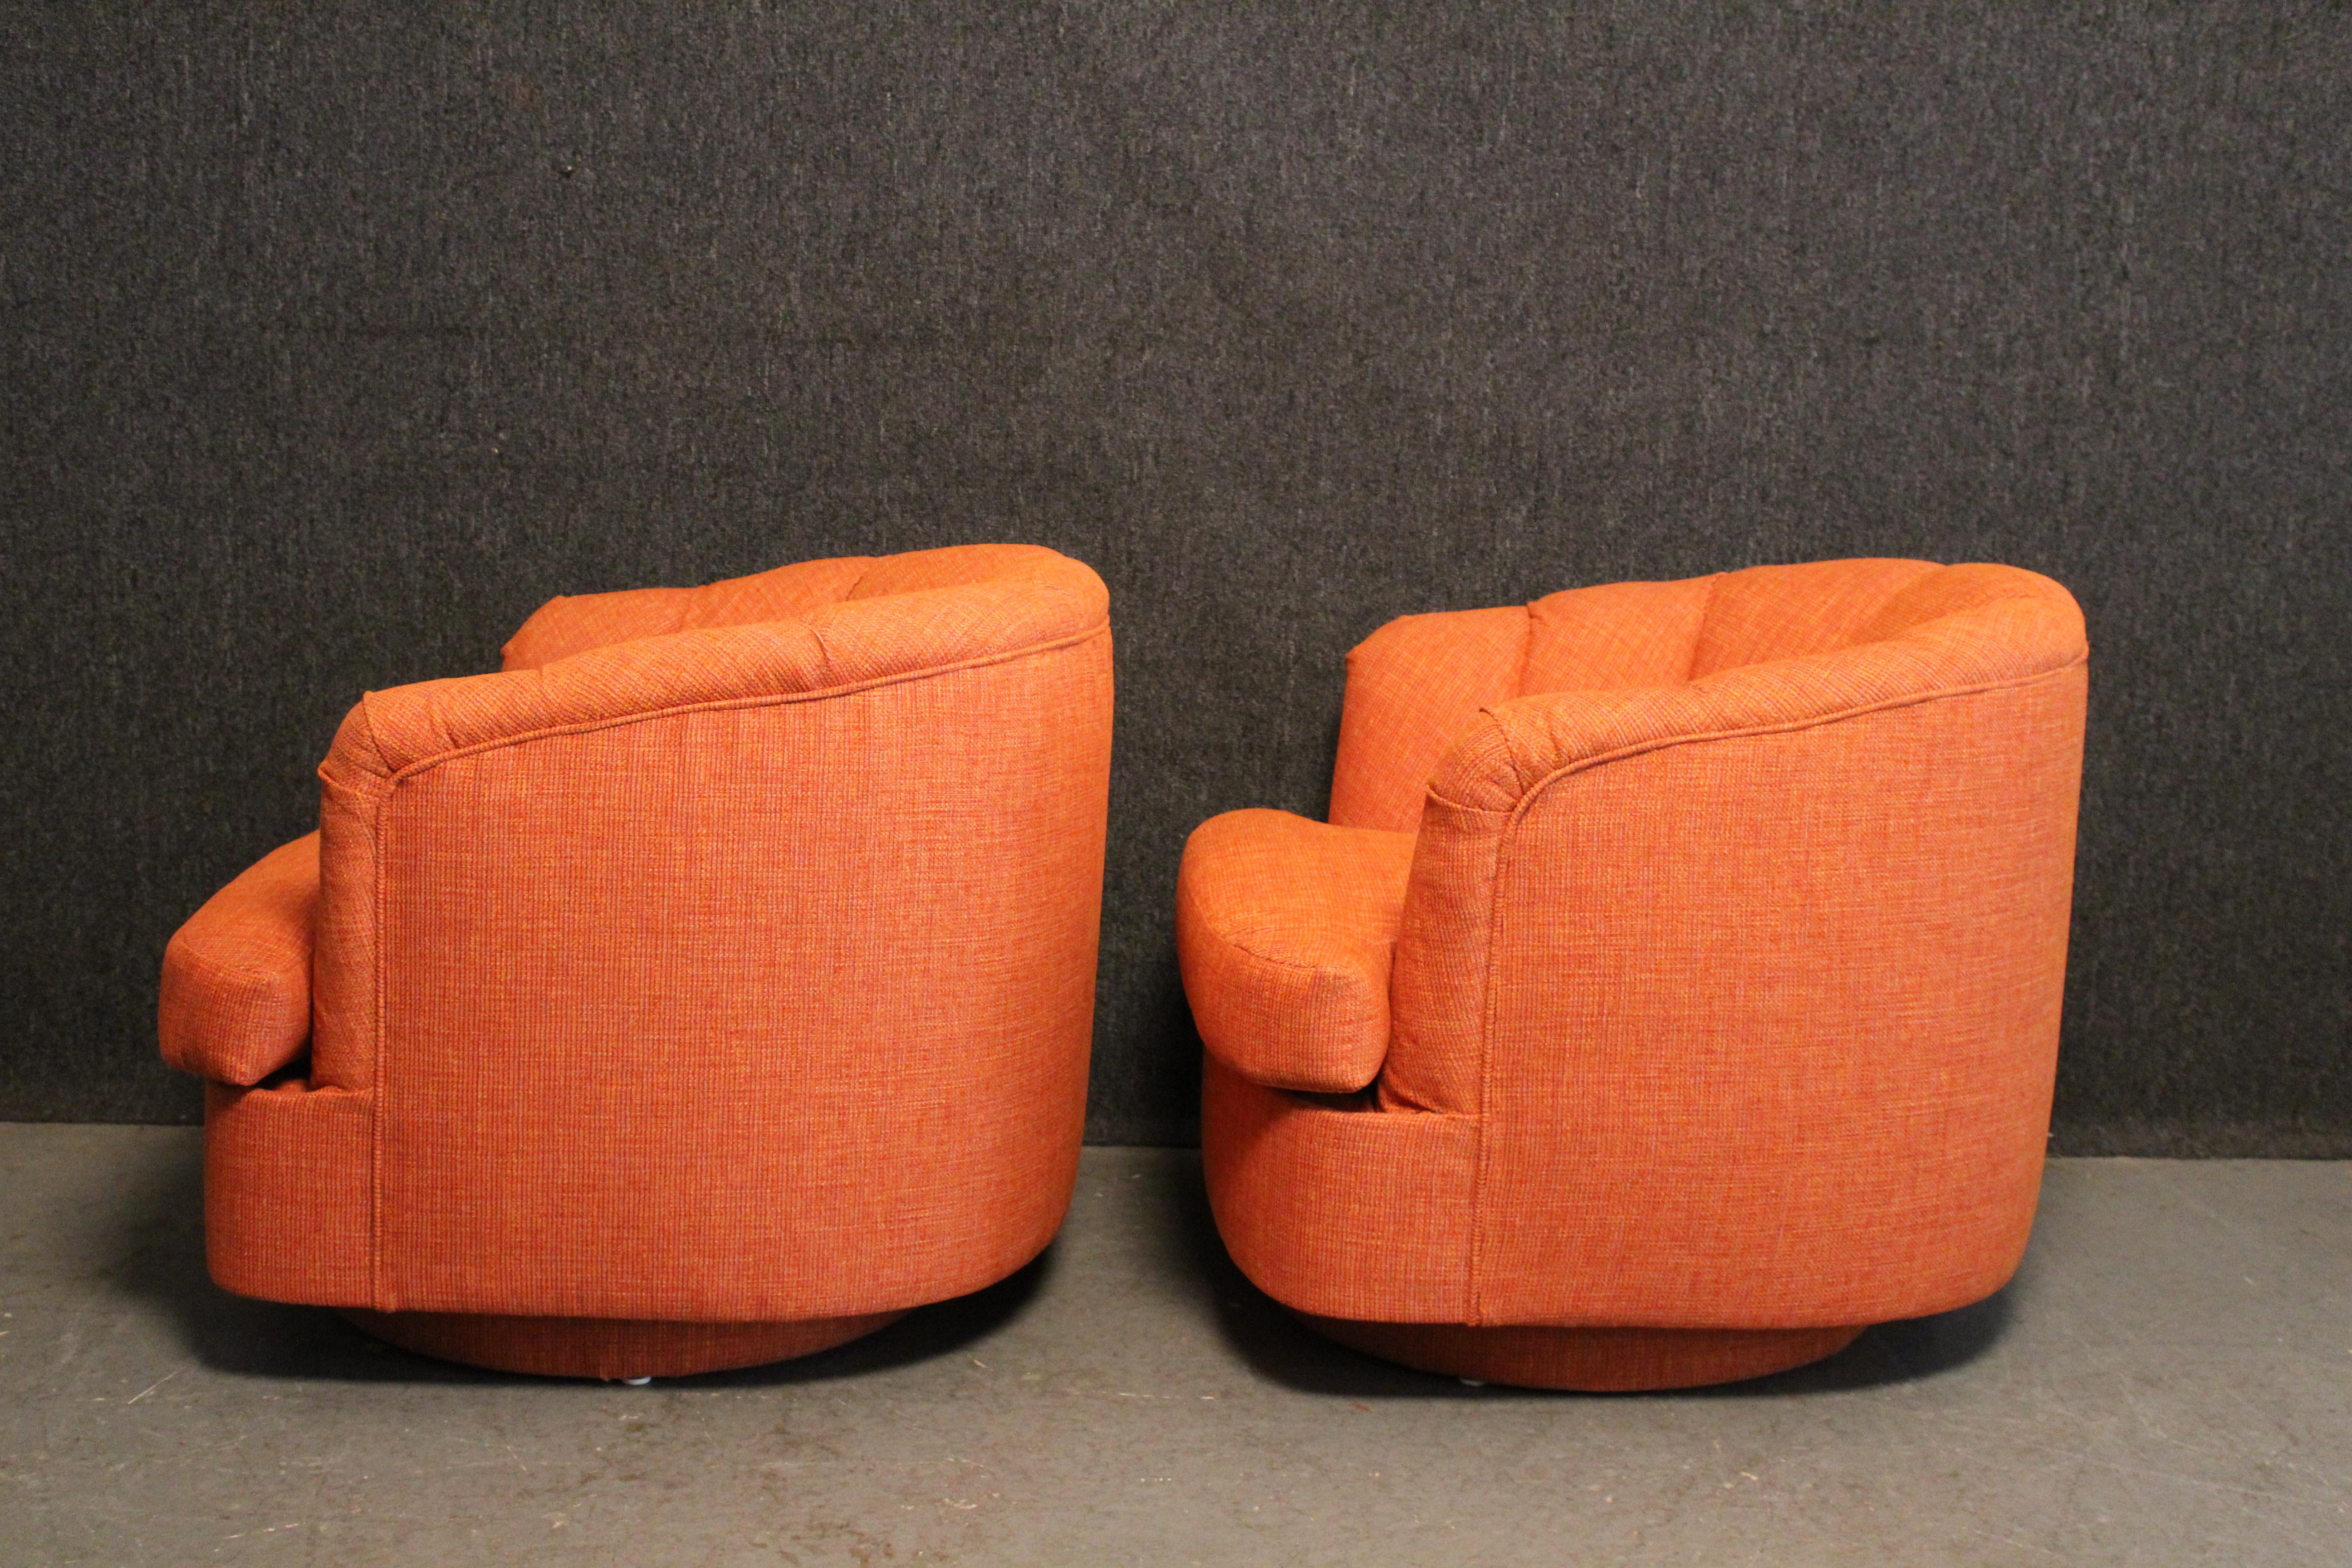 Reupholstered Mid-Century Swivel Chairs by Directional Furniture In Excellent Condition For Sale In Brooklyn, NY